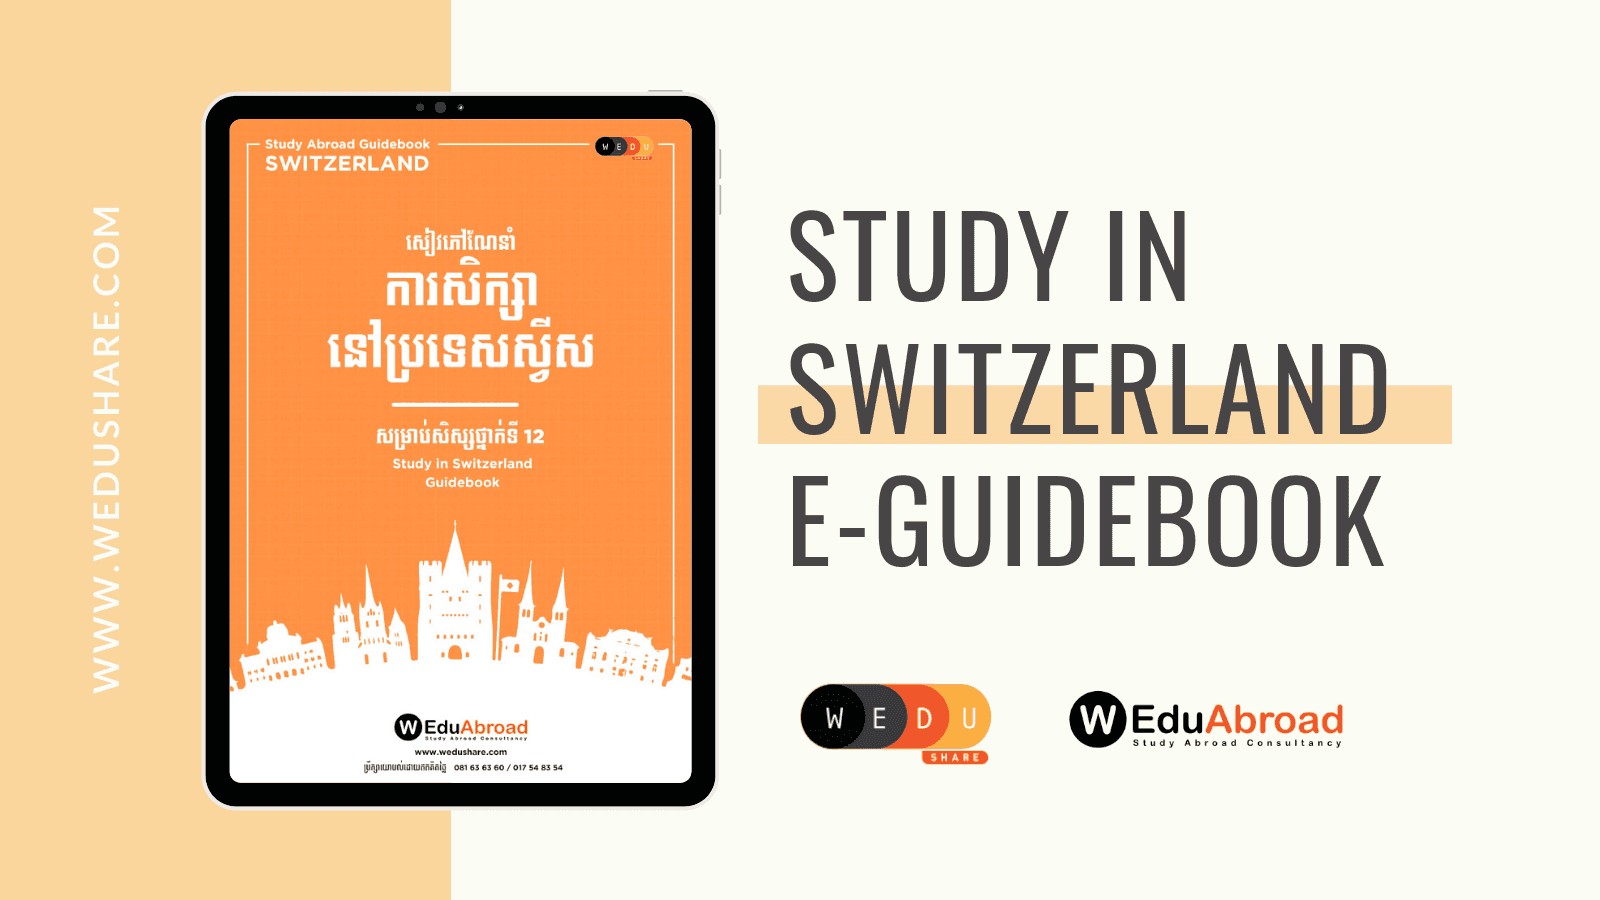 Attention! Study in Switzerland E-Guidebook is on the way!